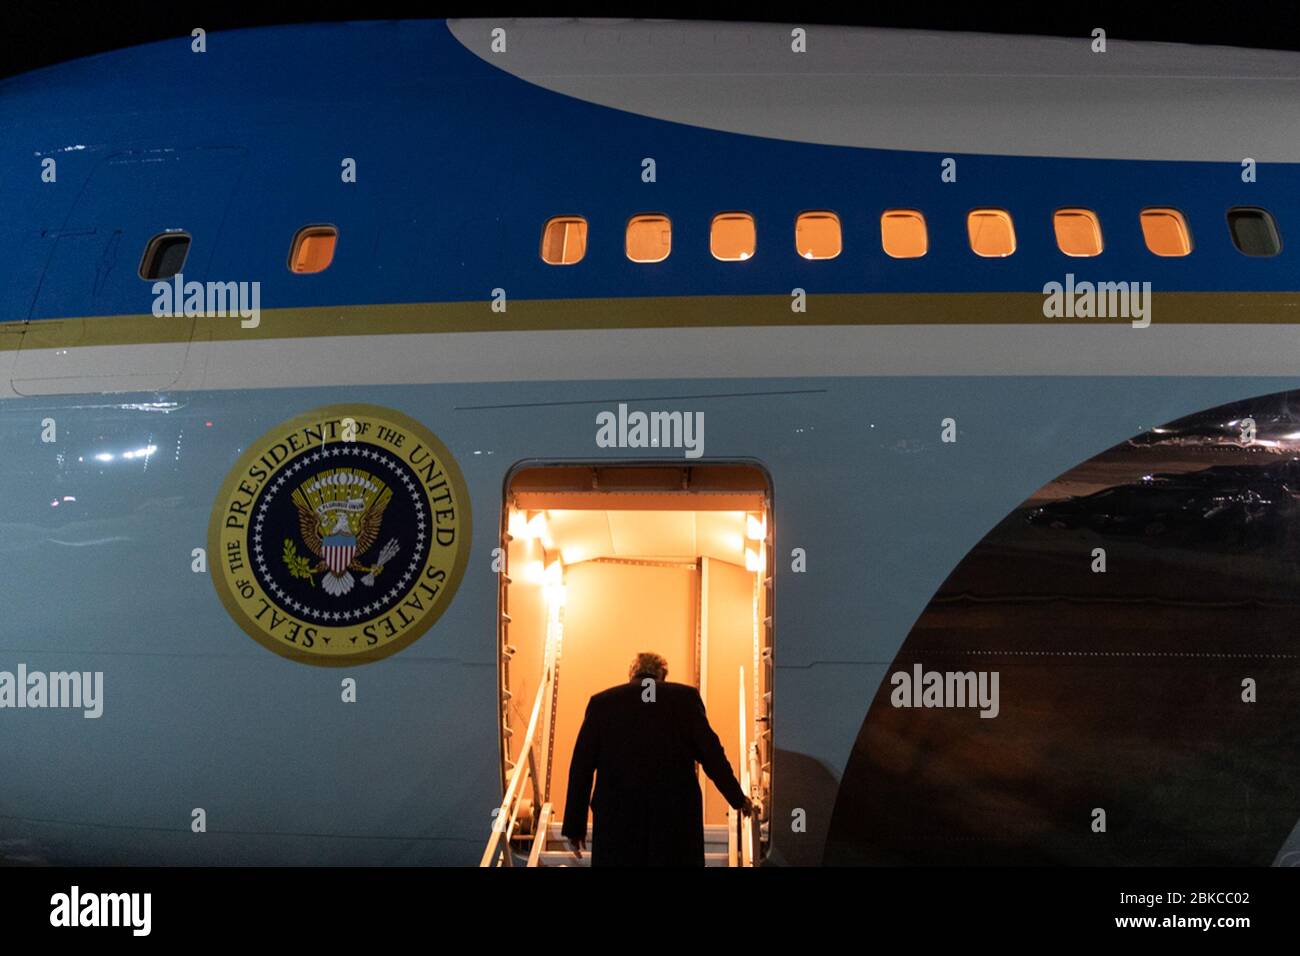 President Donald J. Trump climbs the stairs to board Air Force One at Peterson Air Force Base in Colorado Springs, Colo. Thursday evening, Feb. 20, 2020, for his return flight to McCarran International Airport in Las Vegas. President Trump Departs Colorado Stock Photo